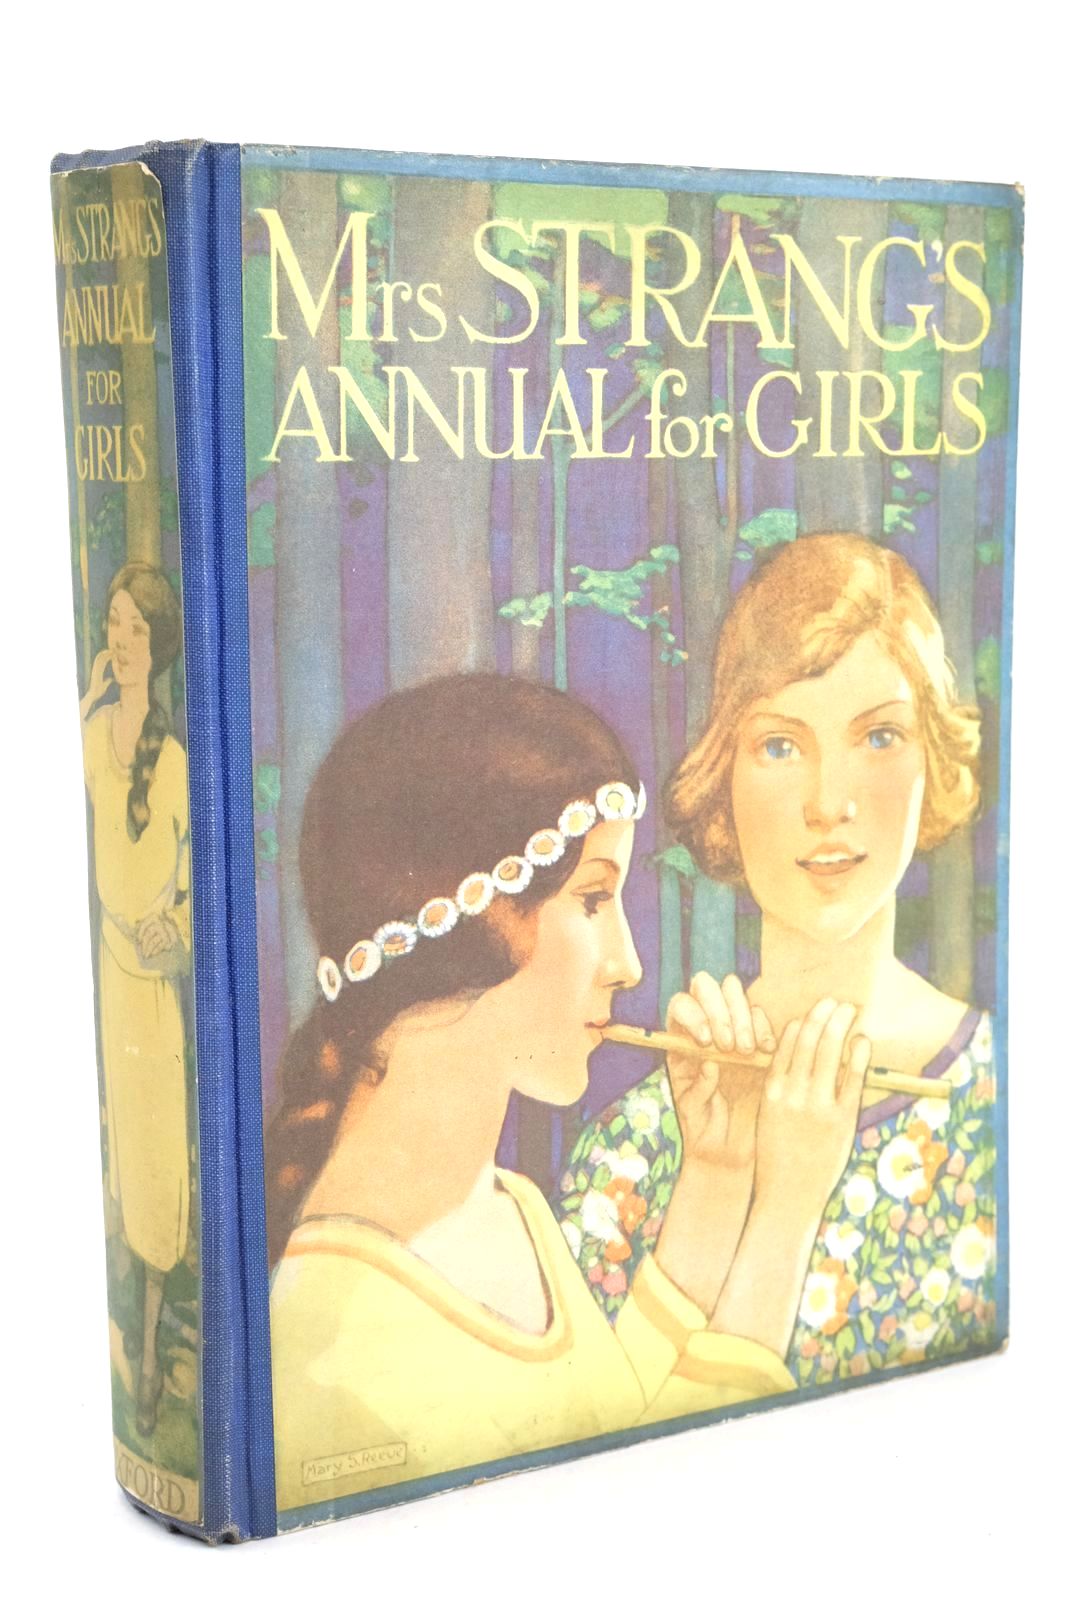 Photo of MRS. STRANG'S ANNUAL FOR GIRLS- Stock Number: 1325625